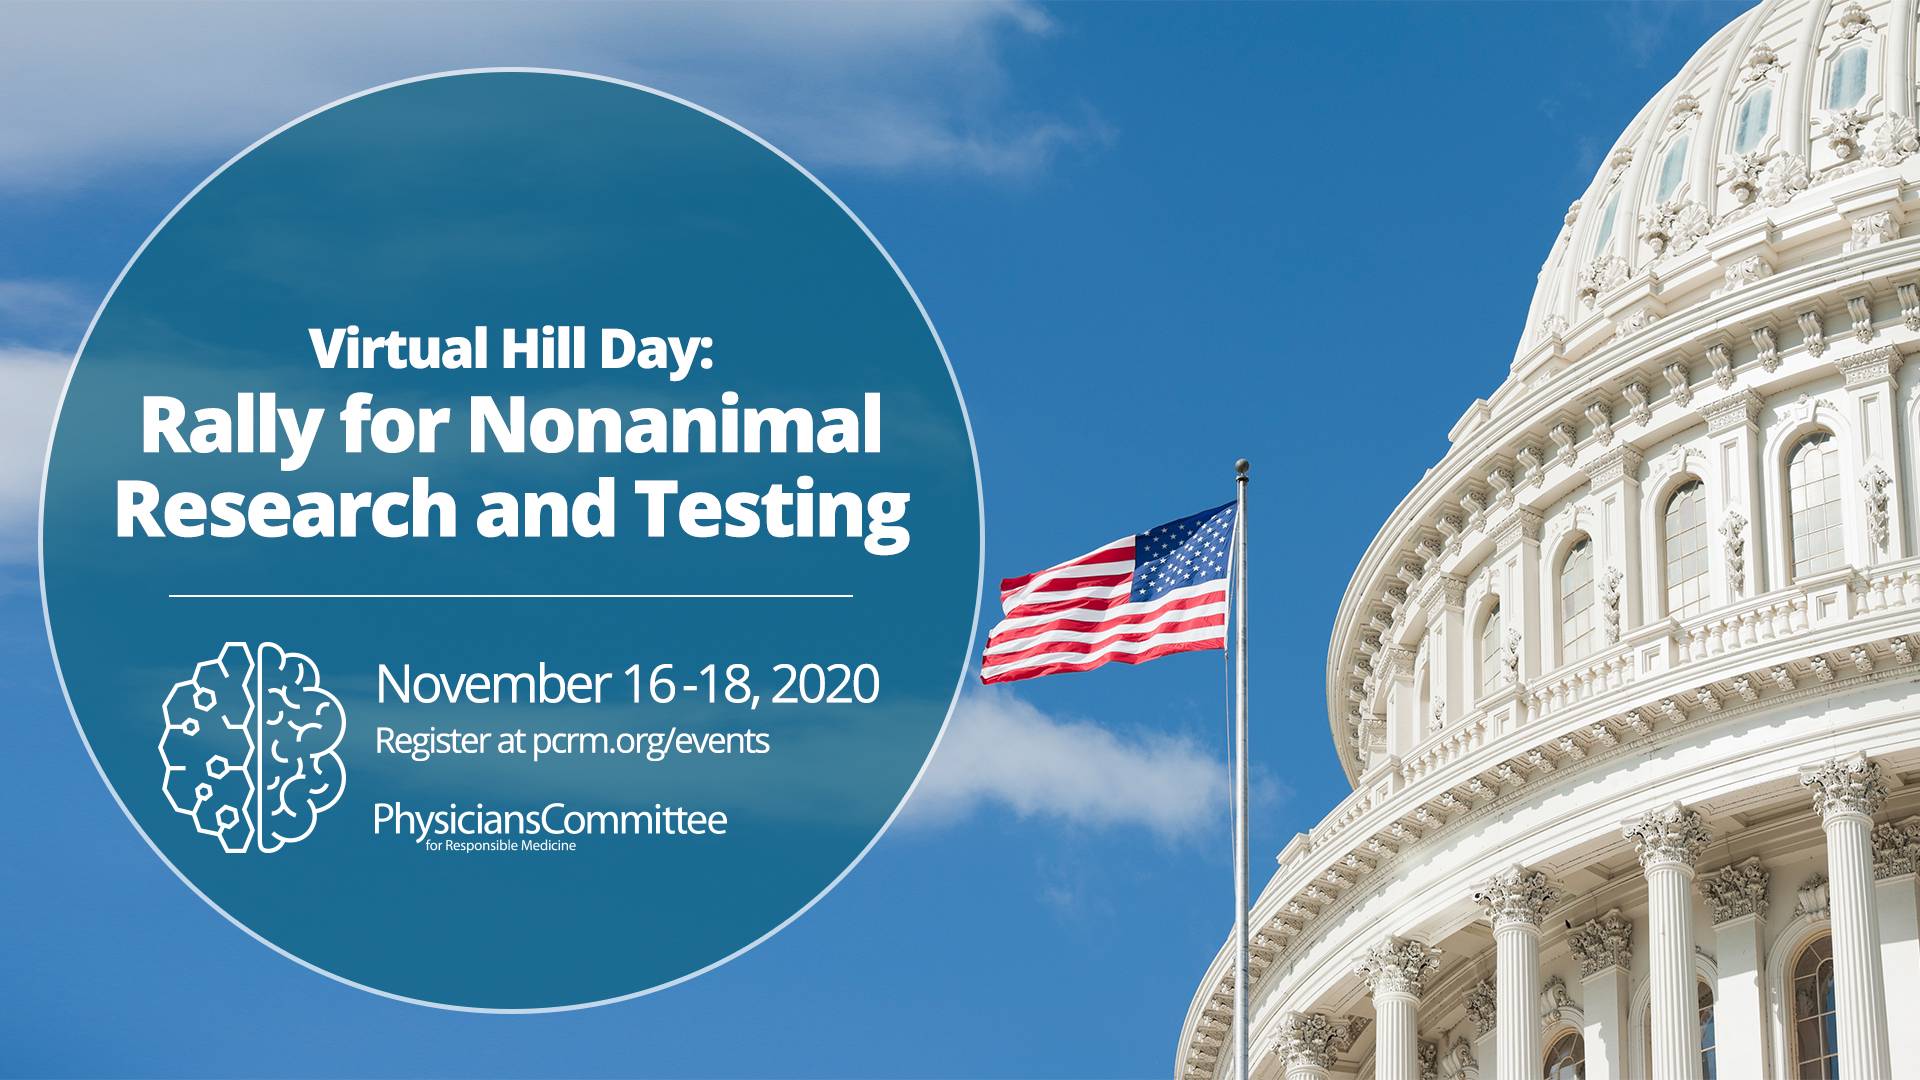 2020 Virtual Hill Day Rally for Nonanimal Research & Testing